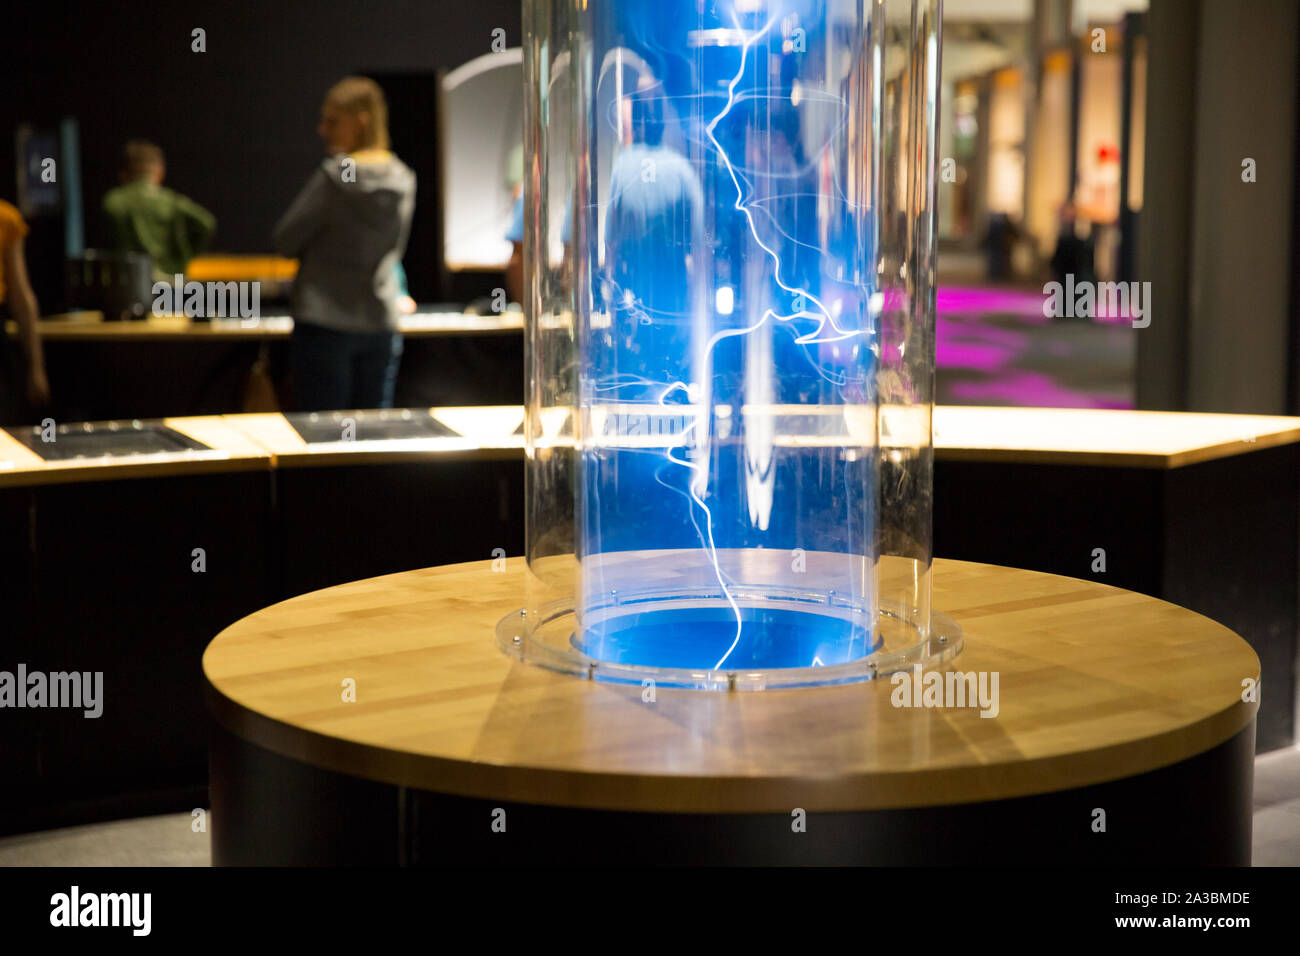 Helsinki, Finland - June 10, 2019: Finnish science center Heureka in  Vantaa. Child studying electrical discharges in a lab Stock Photo - Alamy